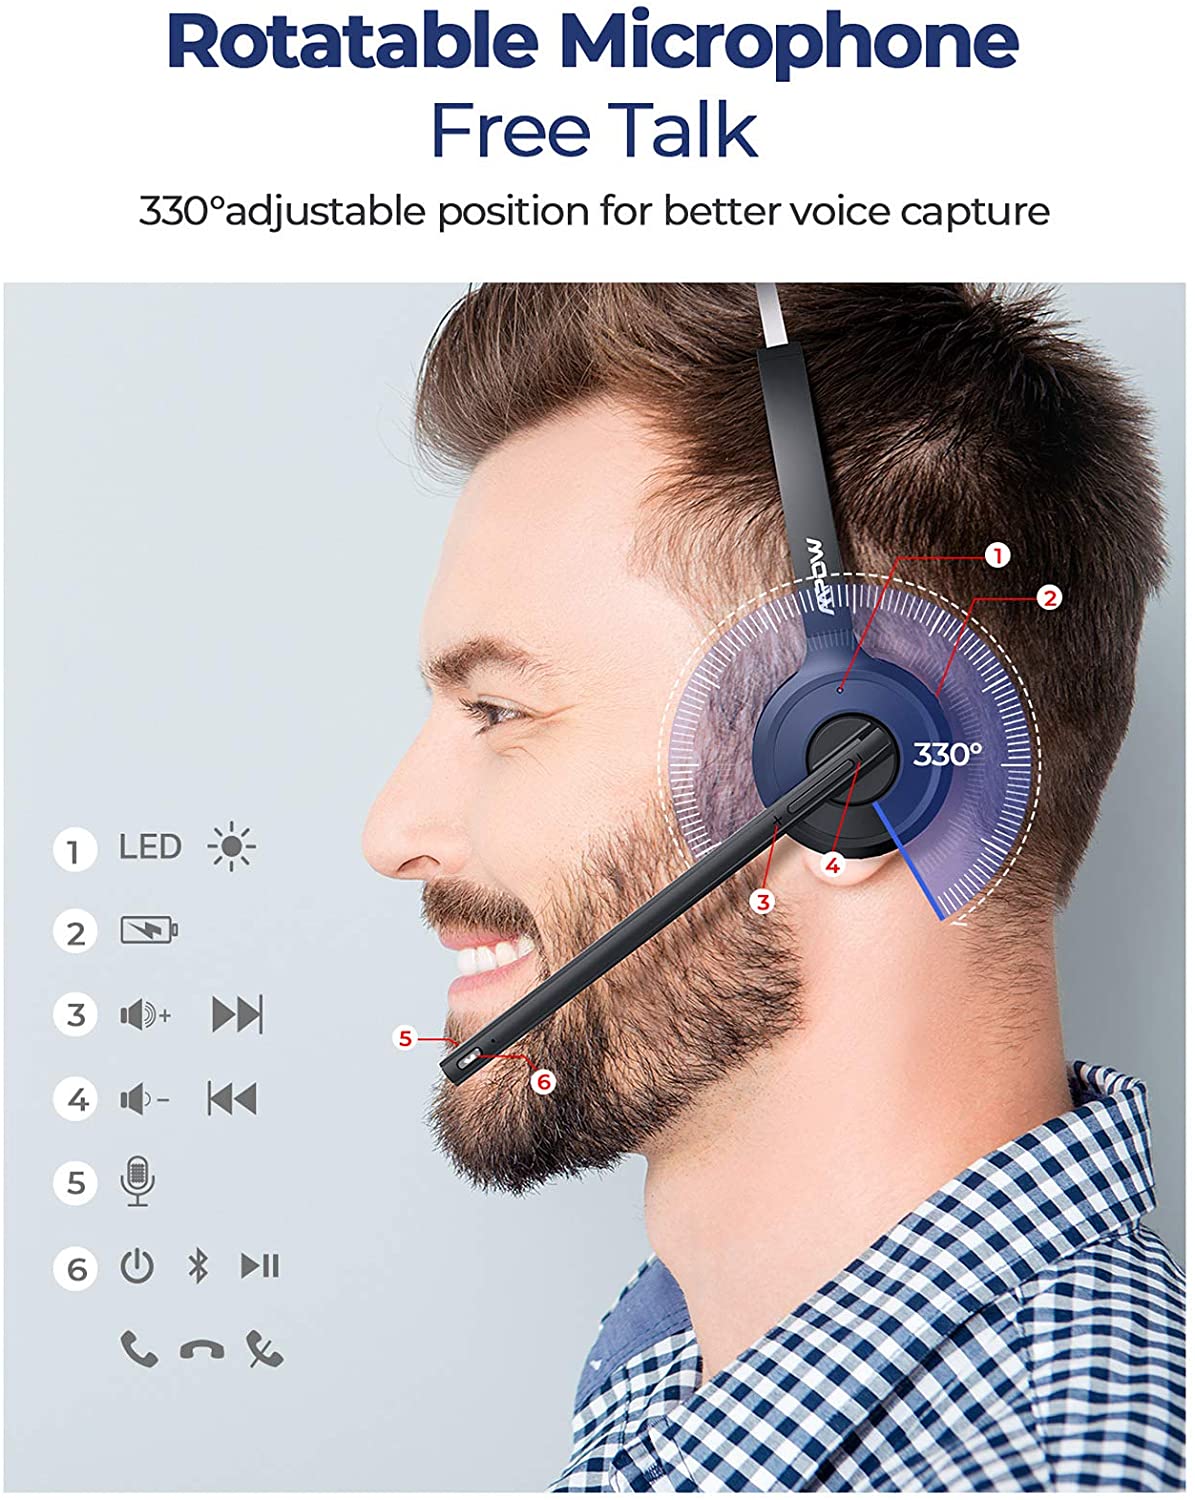 Mpow BH231 M5 Pro Bluetooth 5.0 Headphone Wireless Headset With Noise-Suppressing Mic Handsfree Headphones For Office Outdoor